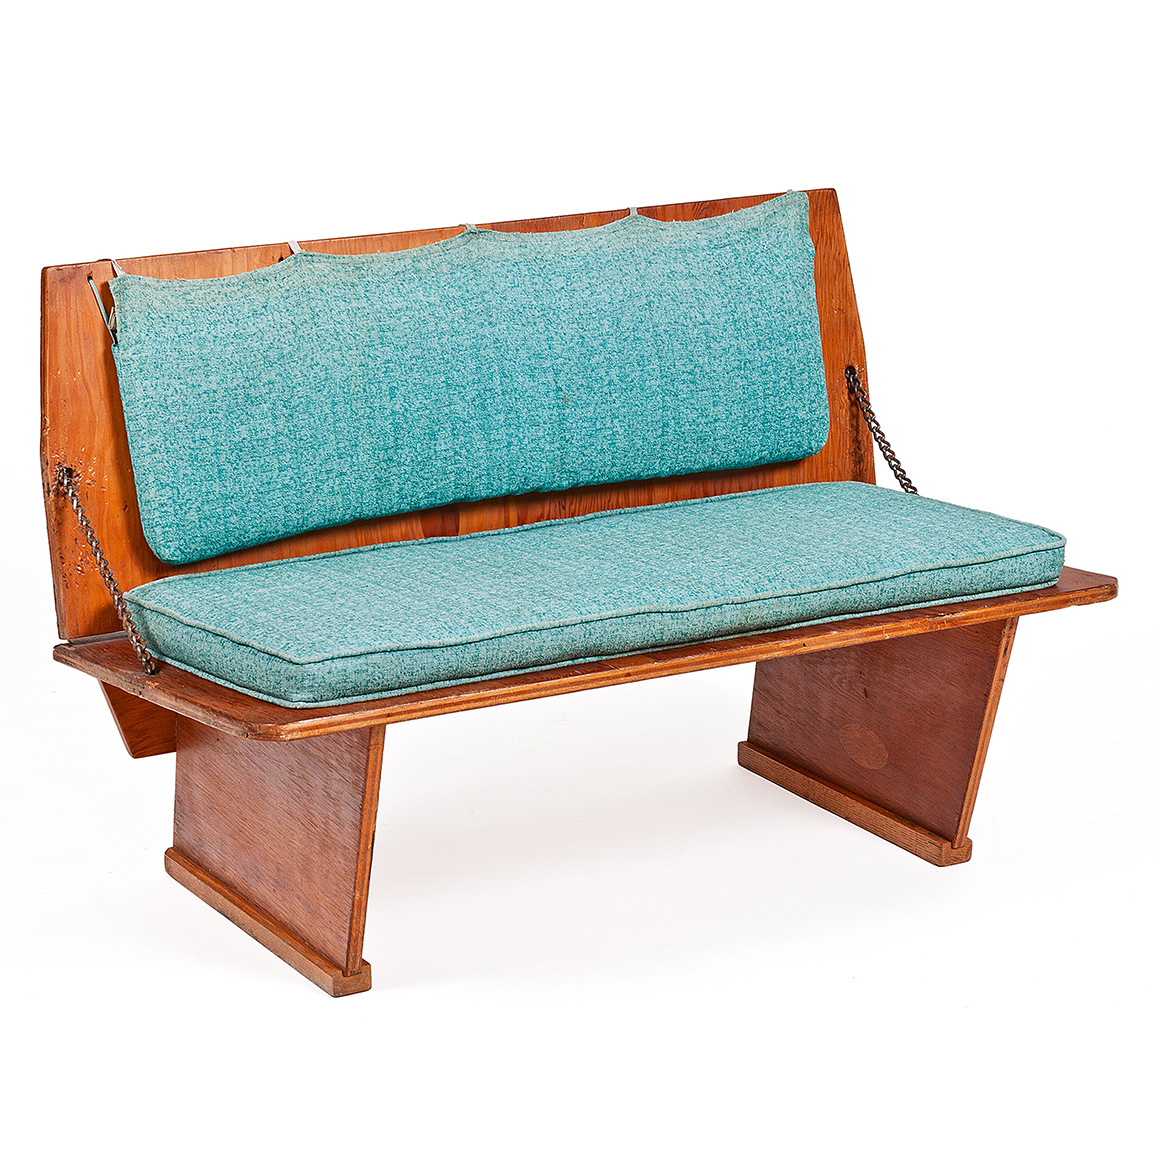 Frank Lloyd Wright Benches and Table from Wright's 1951 Unitarian Church